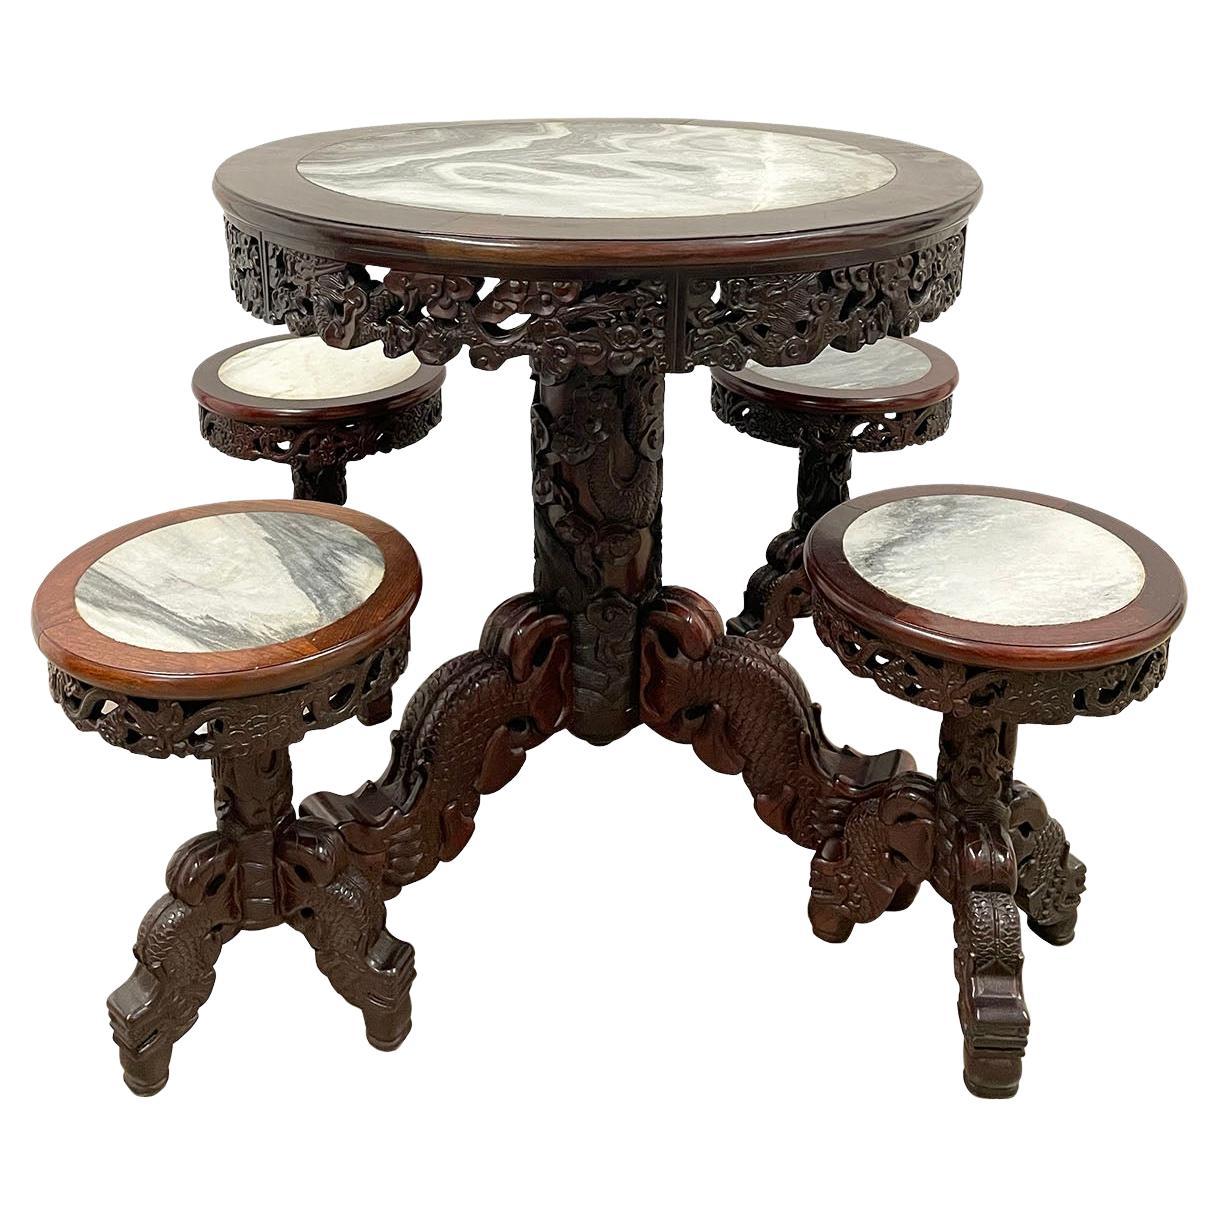 20 Century Chinese Marble Top Hardwood Carved Round Dinning Table Set For Sale